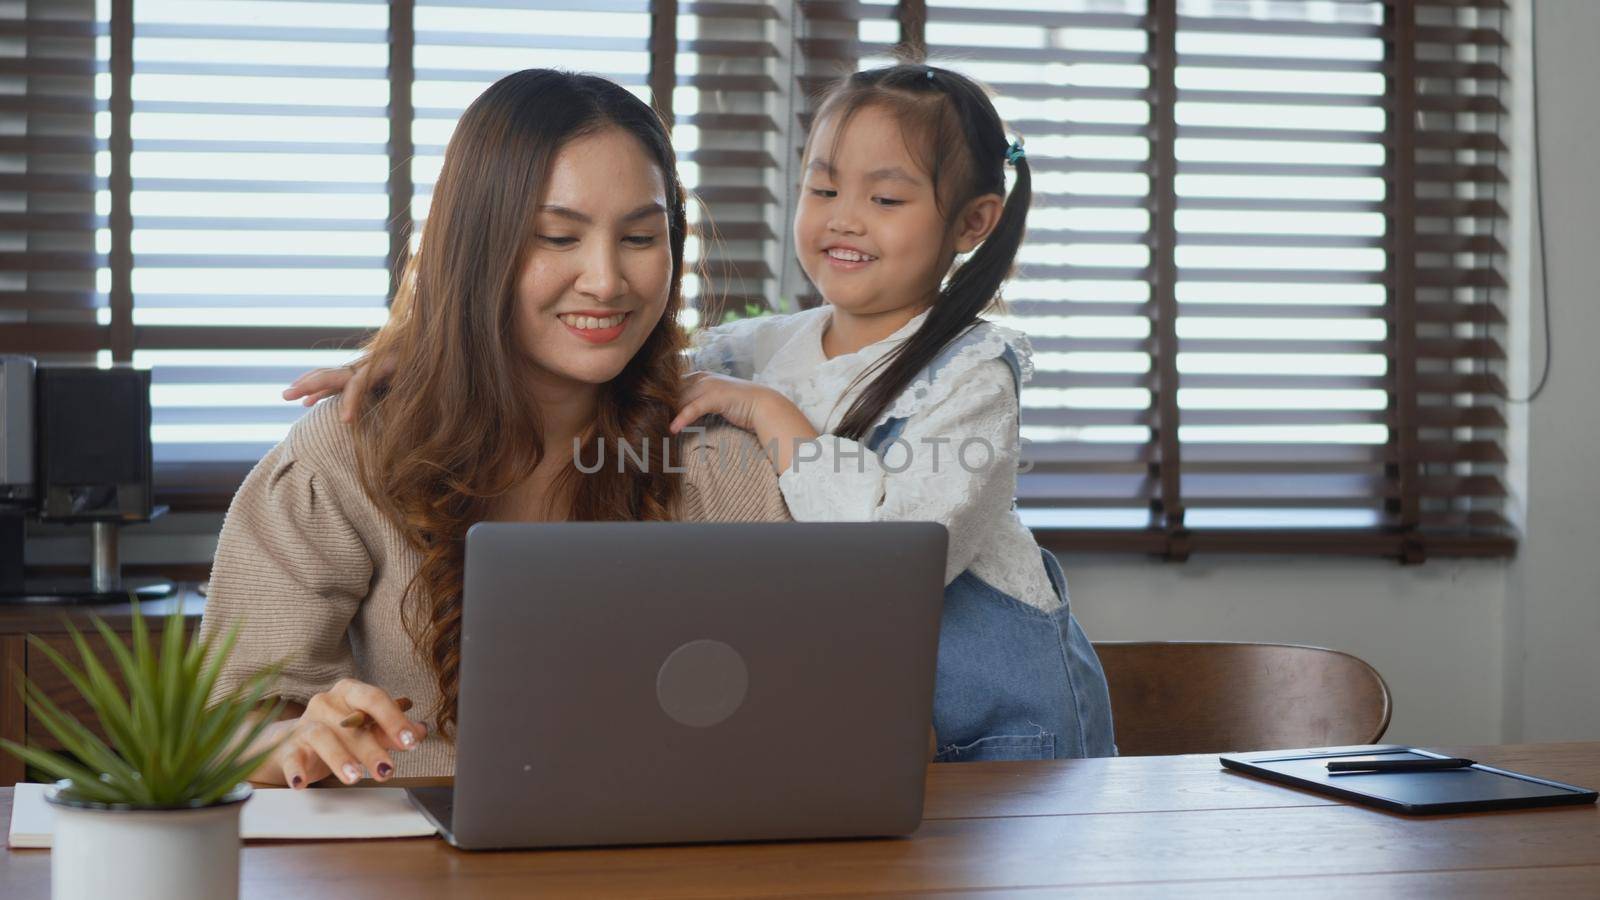 mother working with laptop computer at home his daughter help support giving shoulder massage by Sorapop